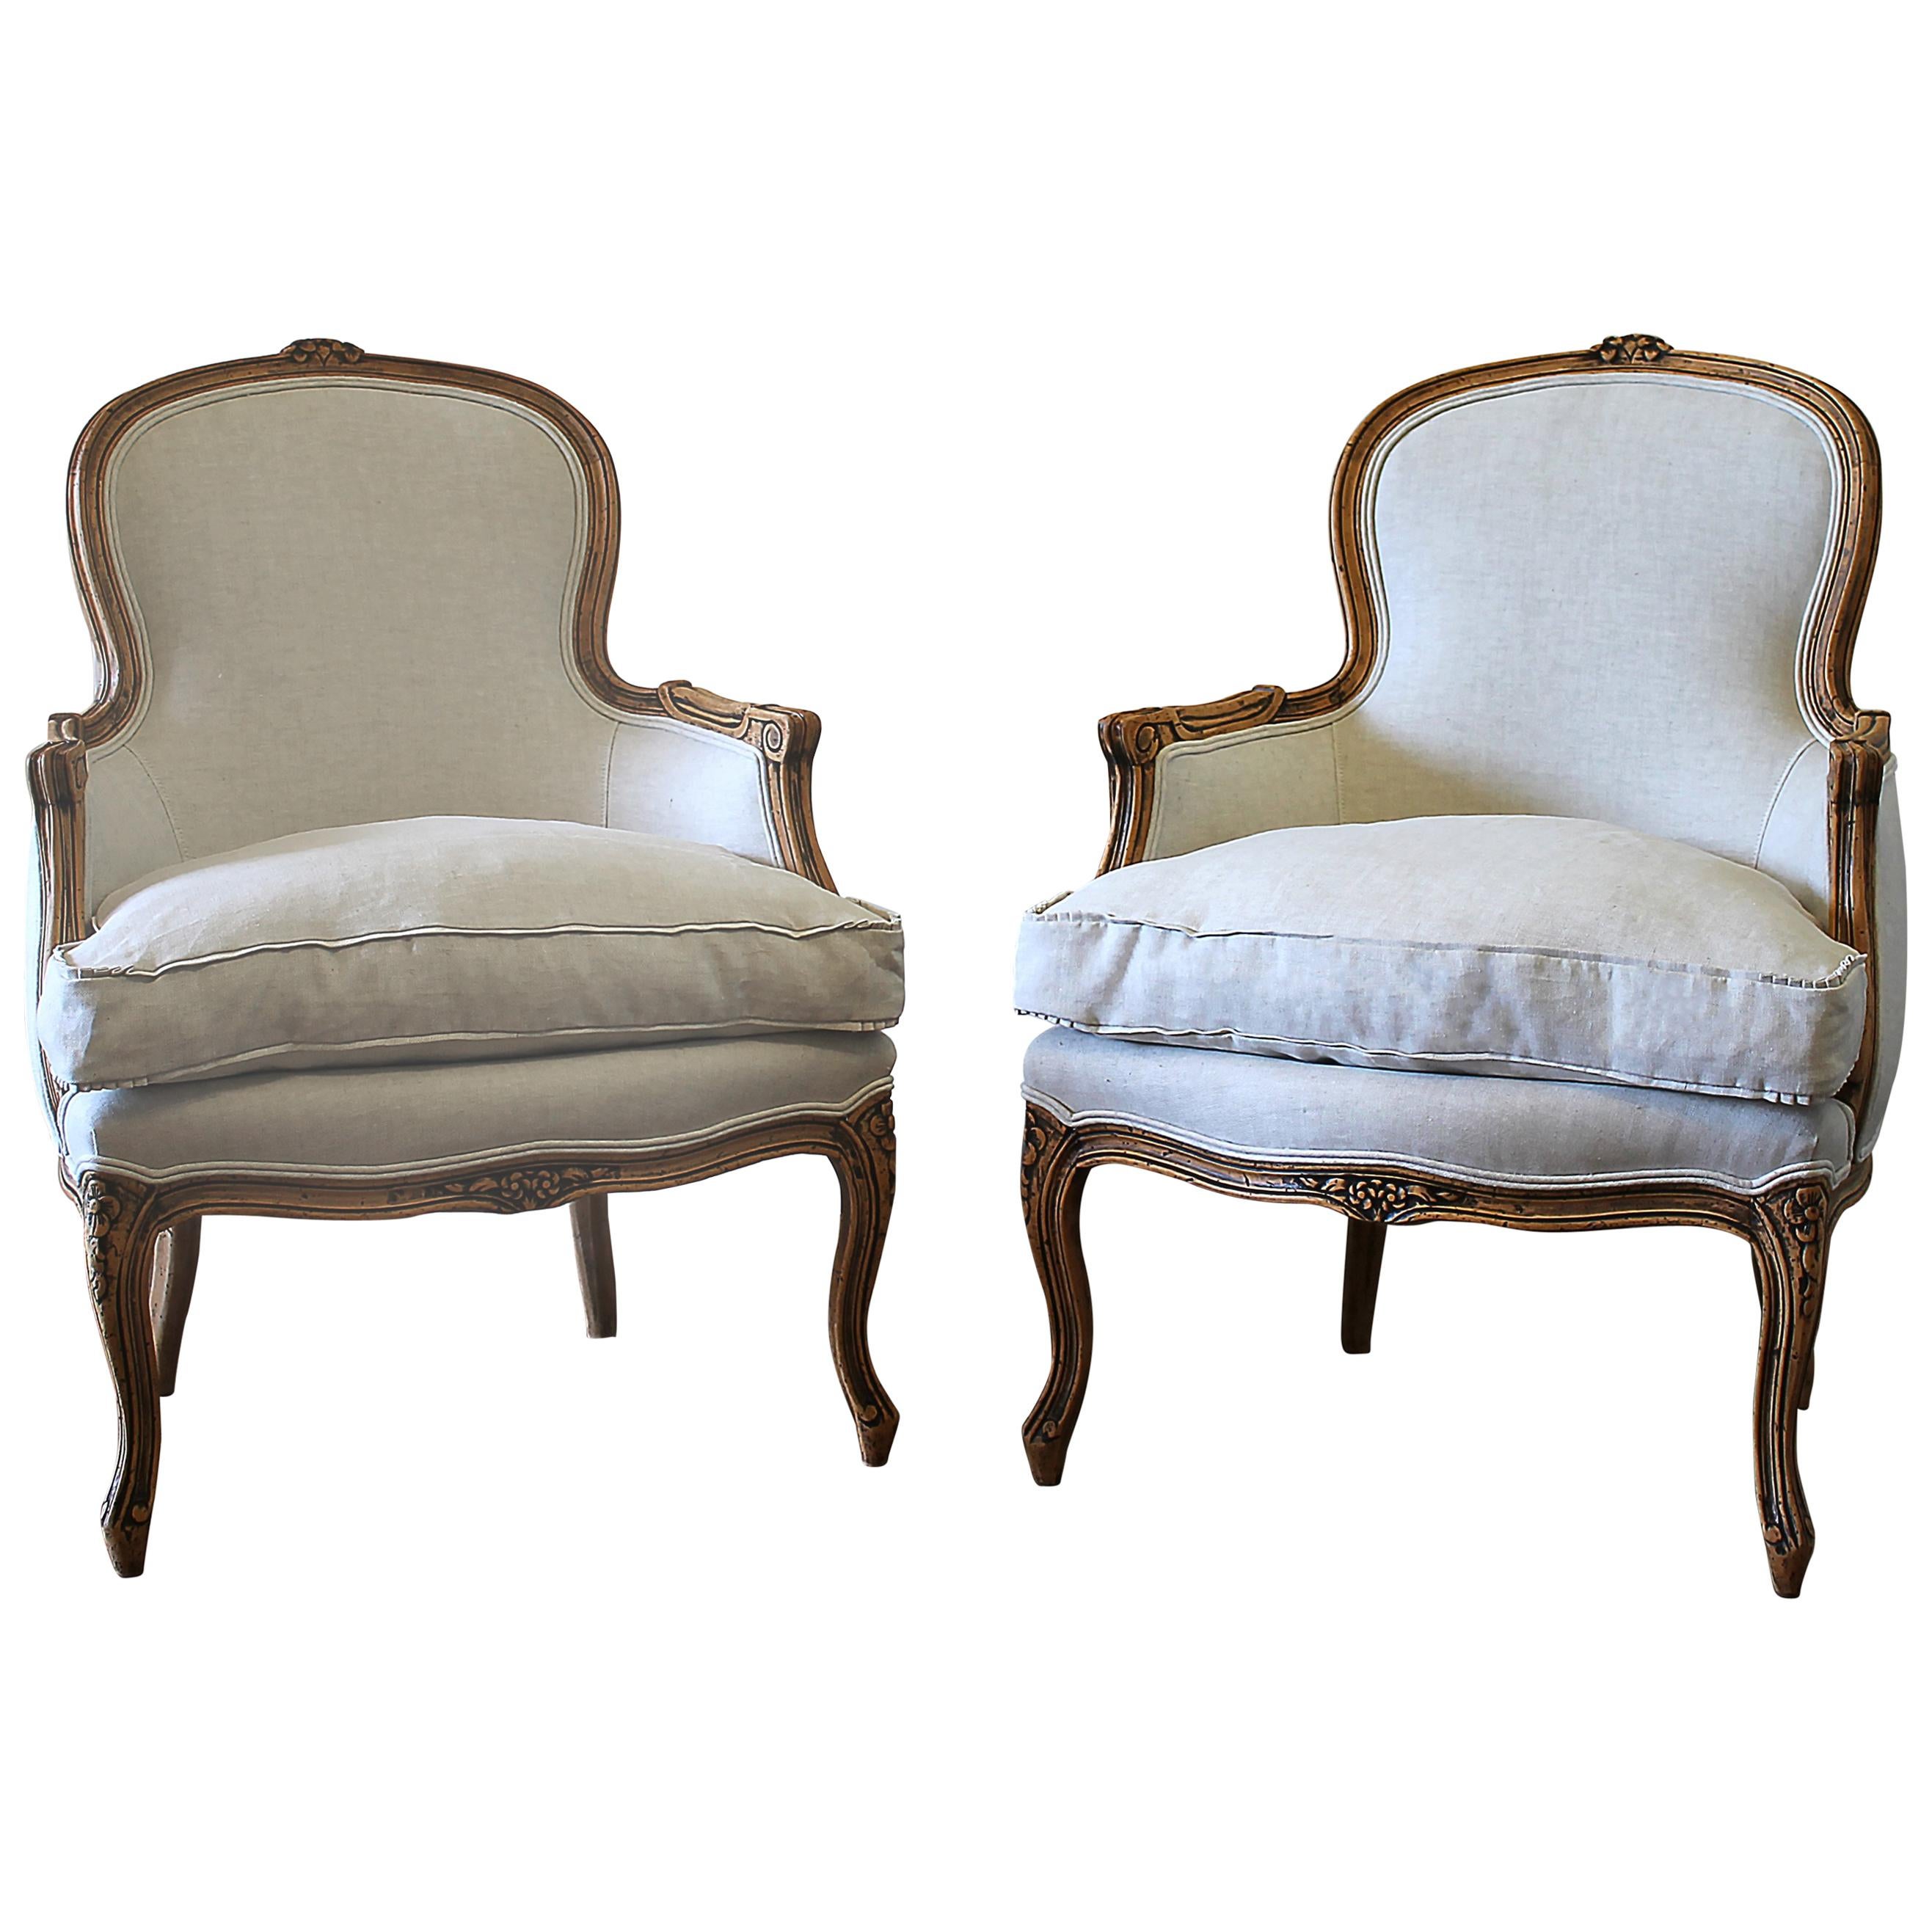 20th Century Pair of Carved & Upholstered Louis XV Style Bergère Chairs in Linen